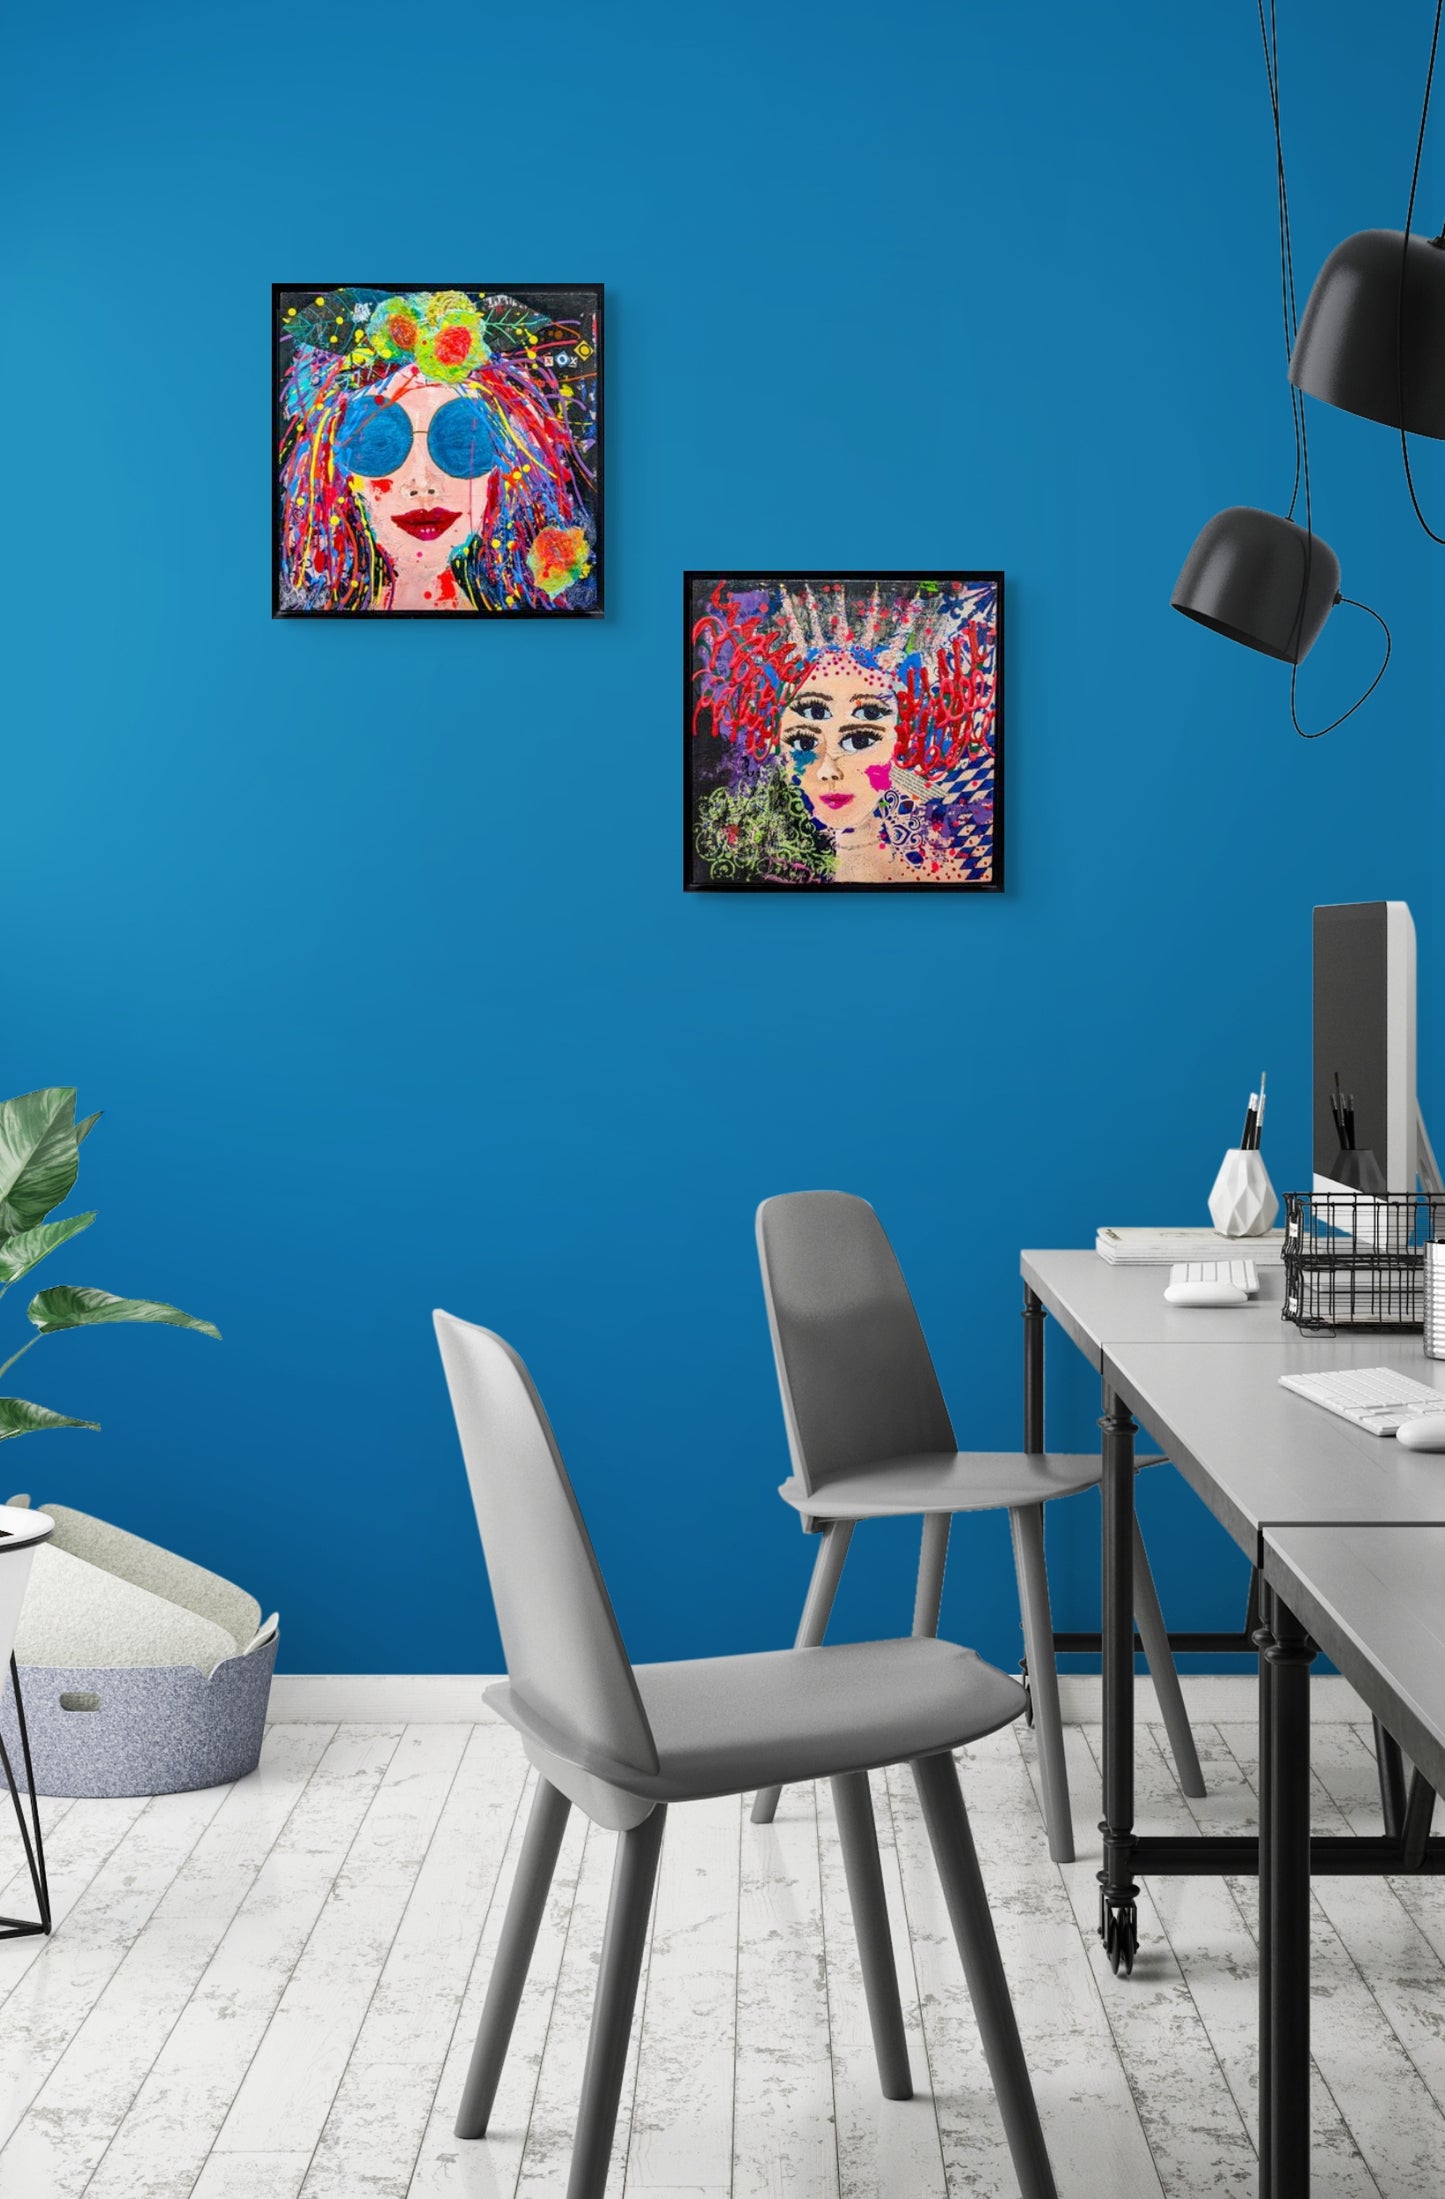 Two Whimsy Girls, Mini Me and Double Vision hang on a blue wall in a modern office setting.